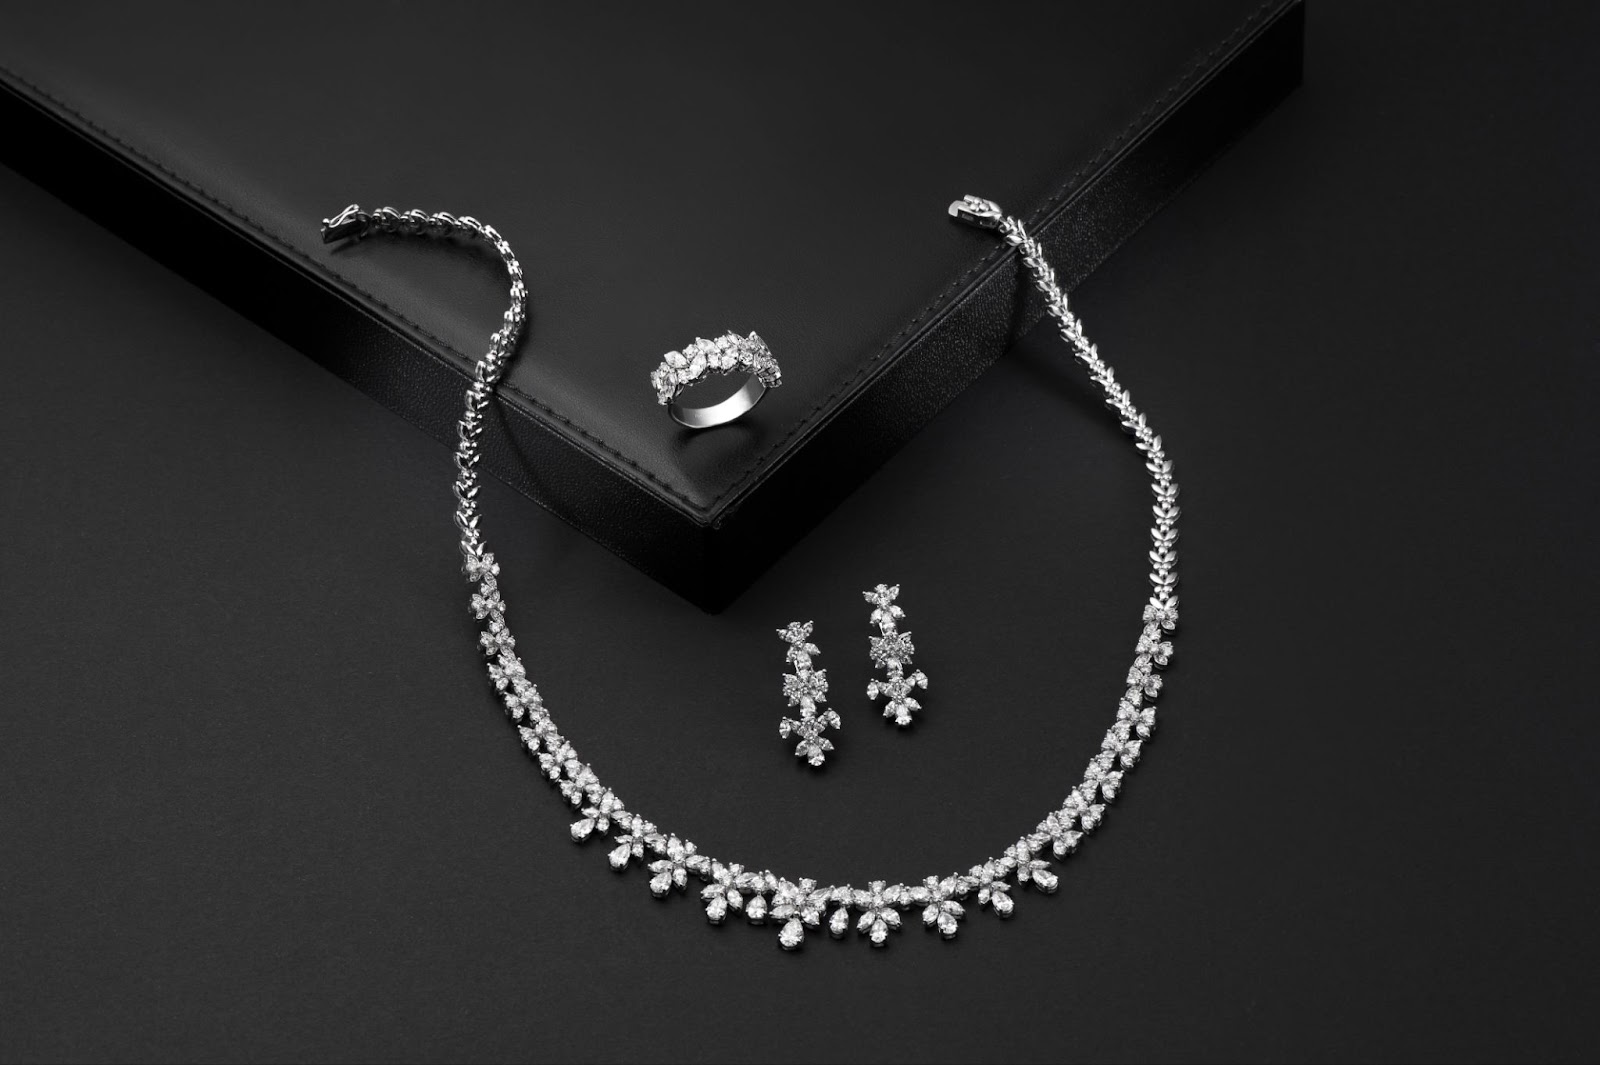 A diamond necklace and earrings.